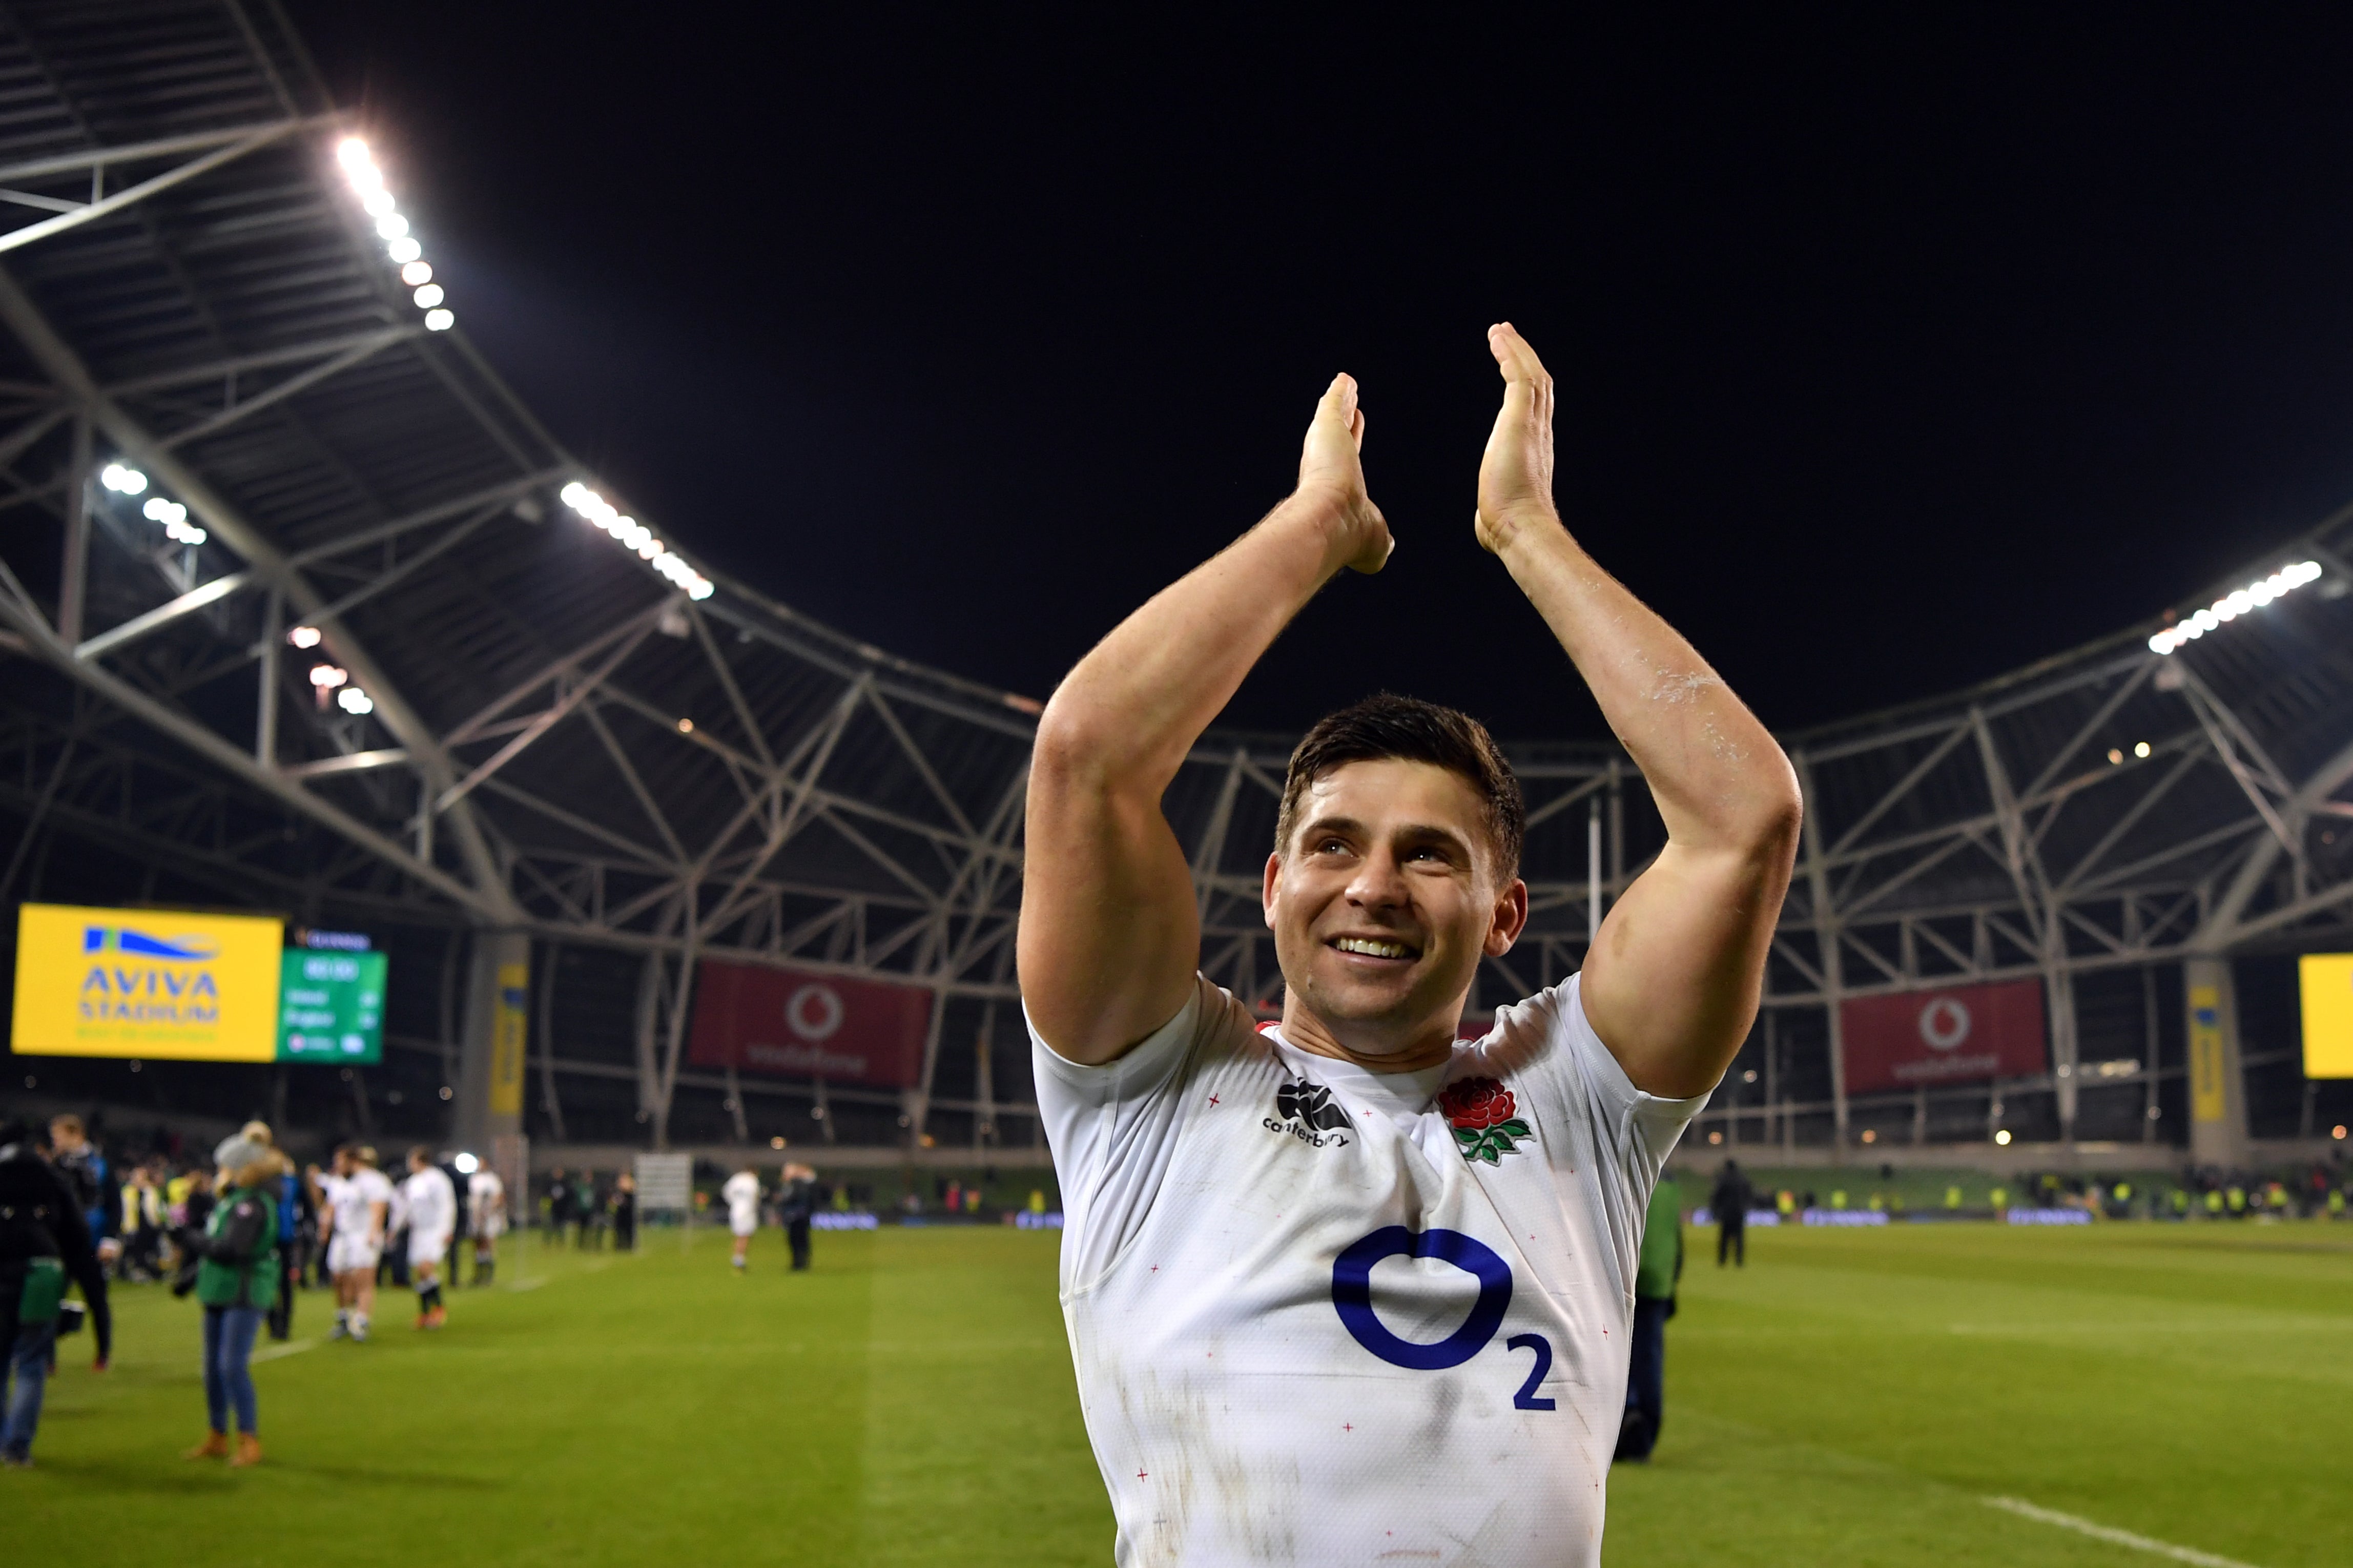 Ben Youngs will retire from international rugby after the World Cup